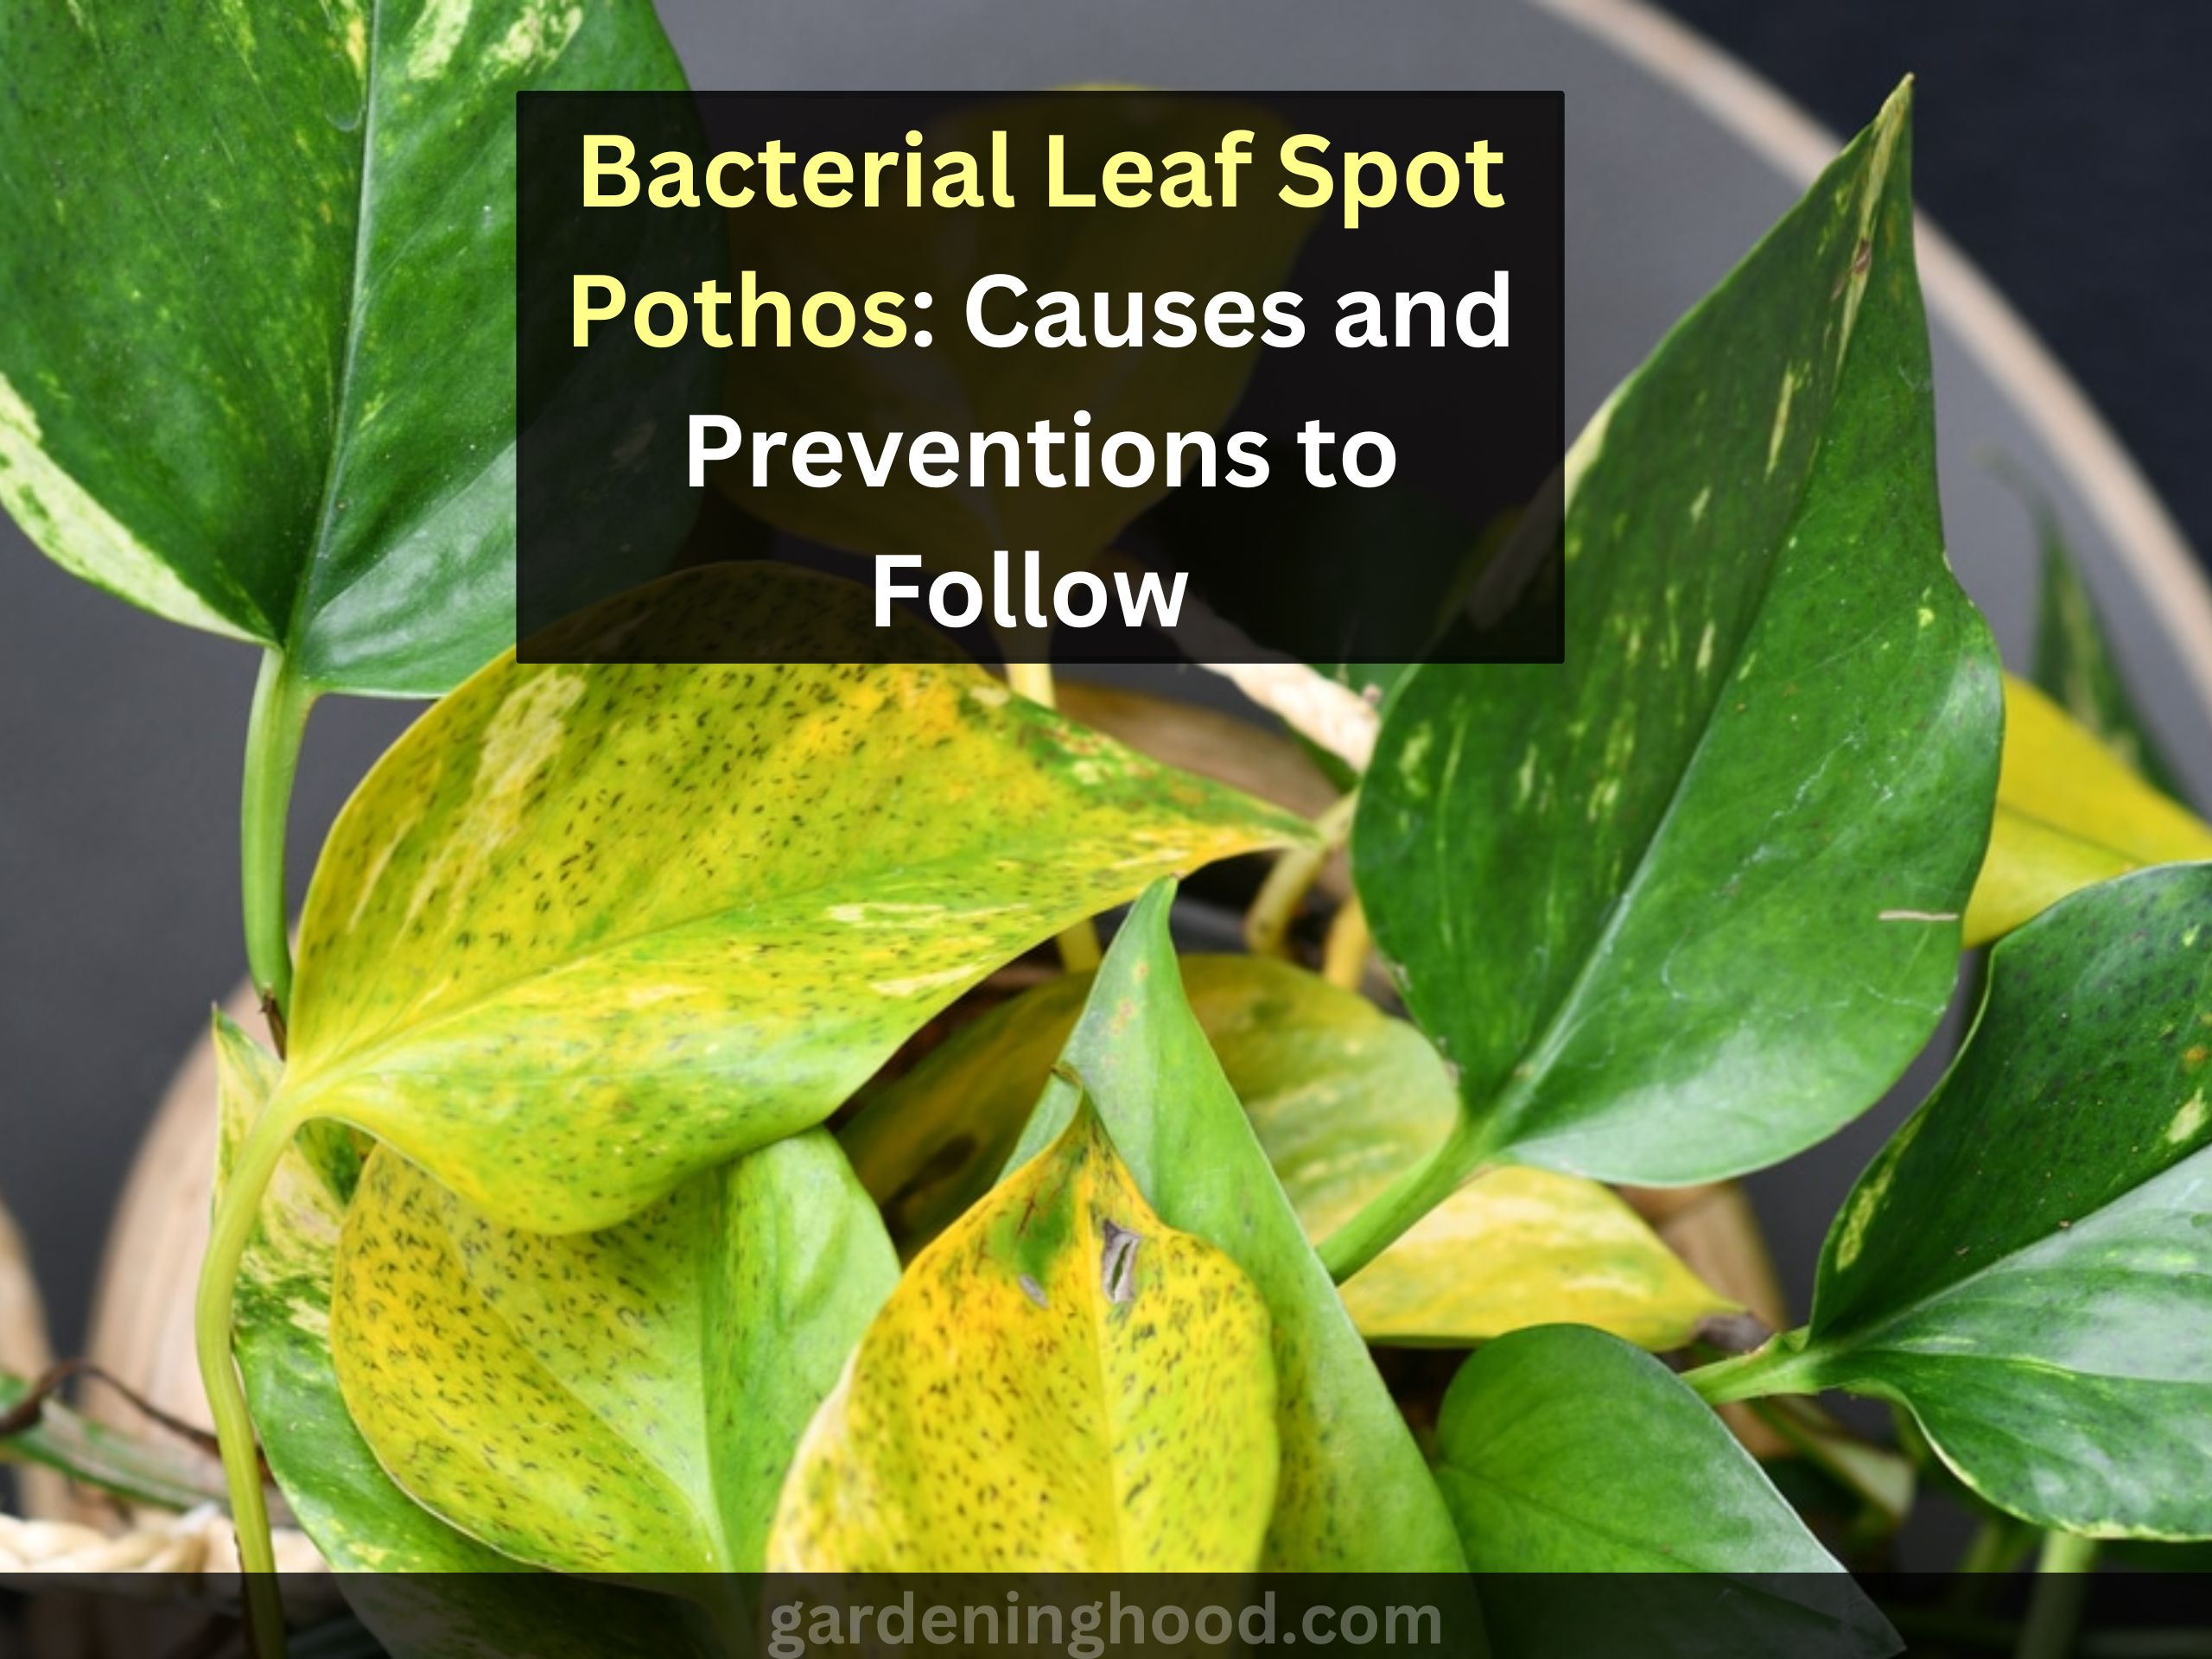 bacterial leaf spot pothos: causes and prevention to follow